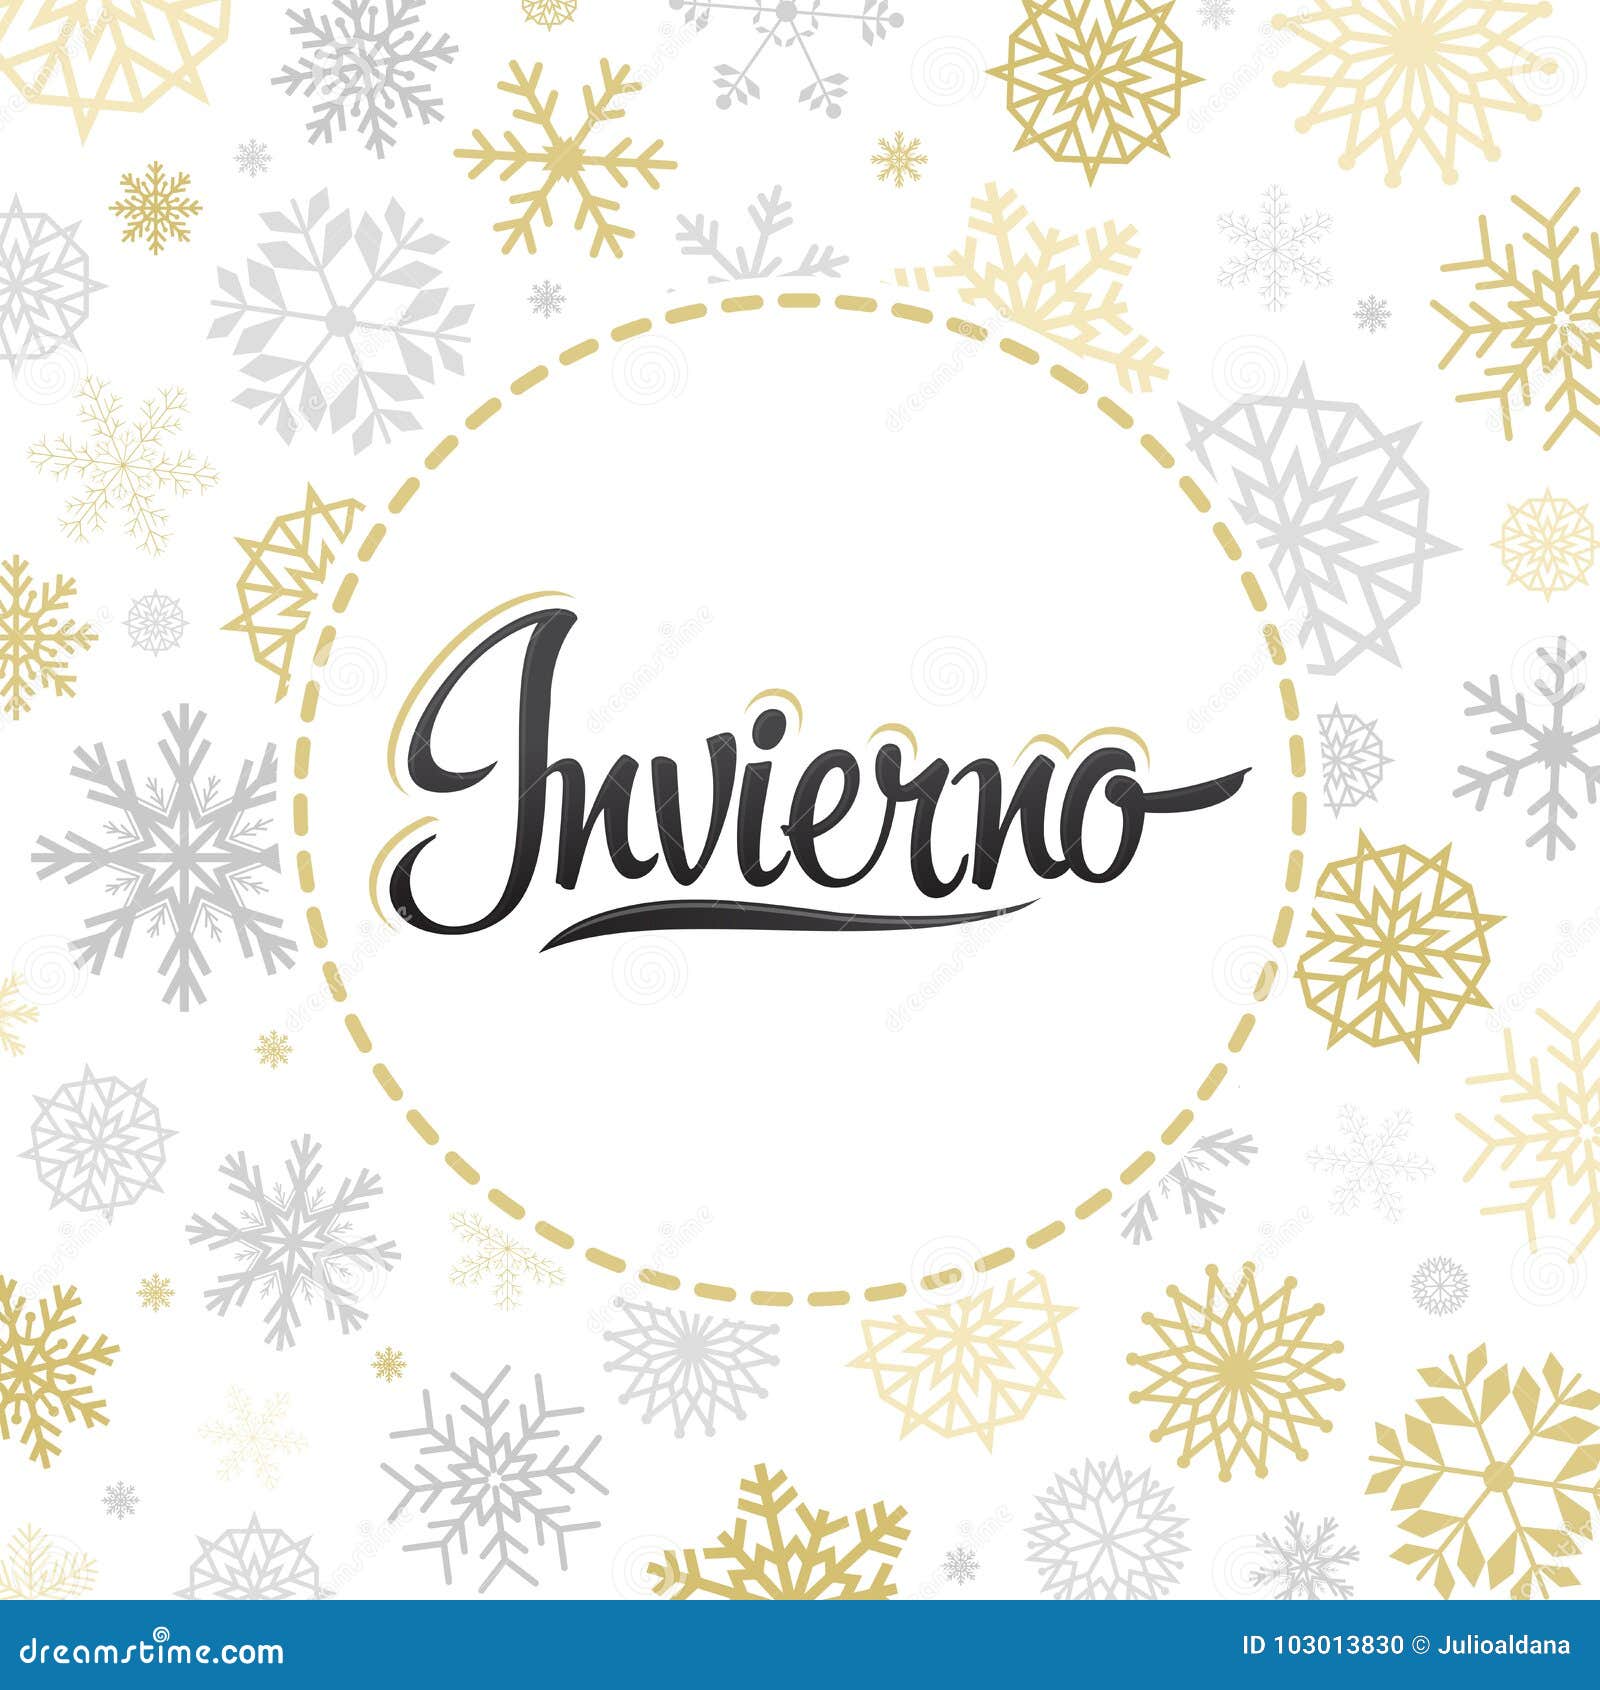 invierno, winter spanish text,  lettering 